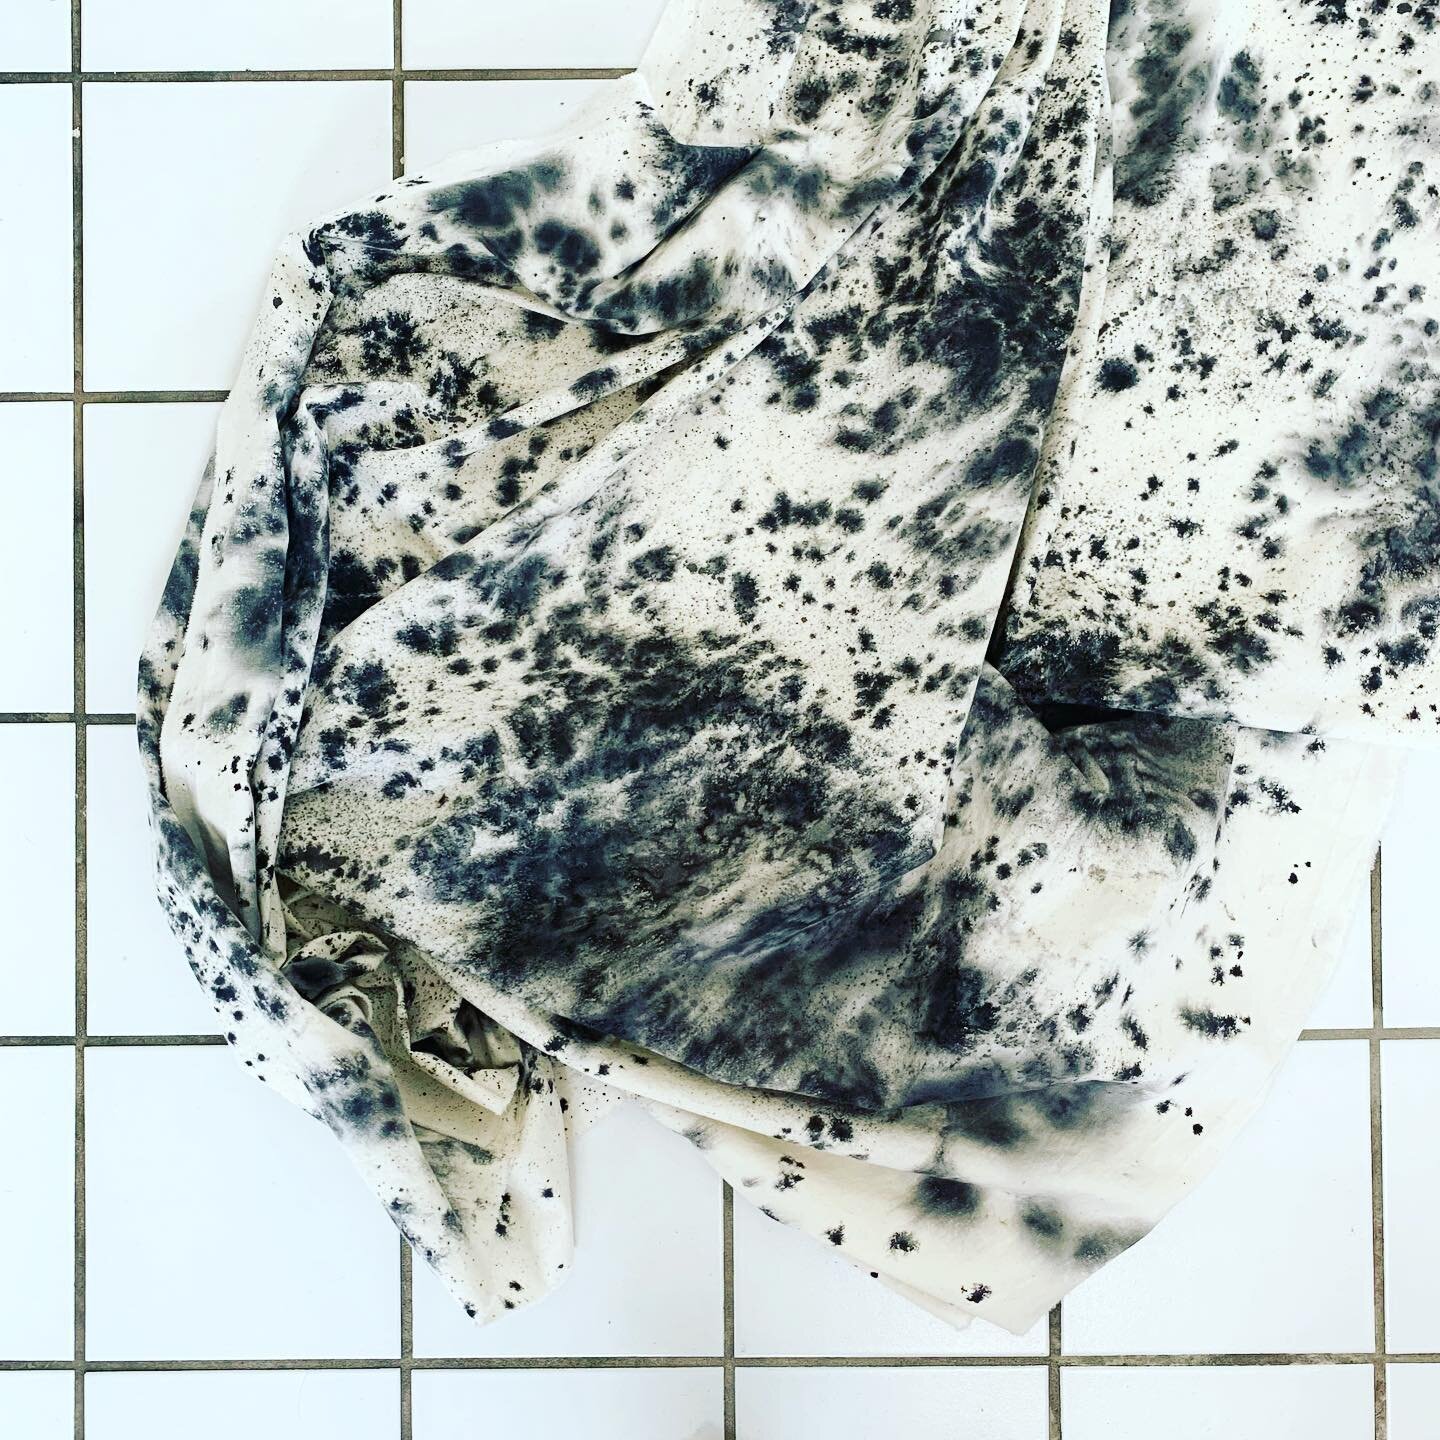 i am on a clothesmaking kick right now, dominated by an obsession with #quiltedcoats - one of the next experiments in that vein will likely feature this watercolor inspired splatter print @konacotton (kona natural) i painted in the garage studio this